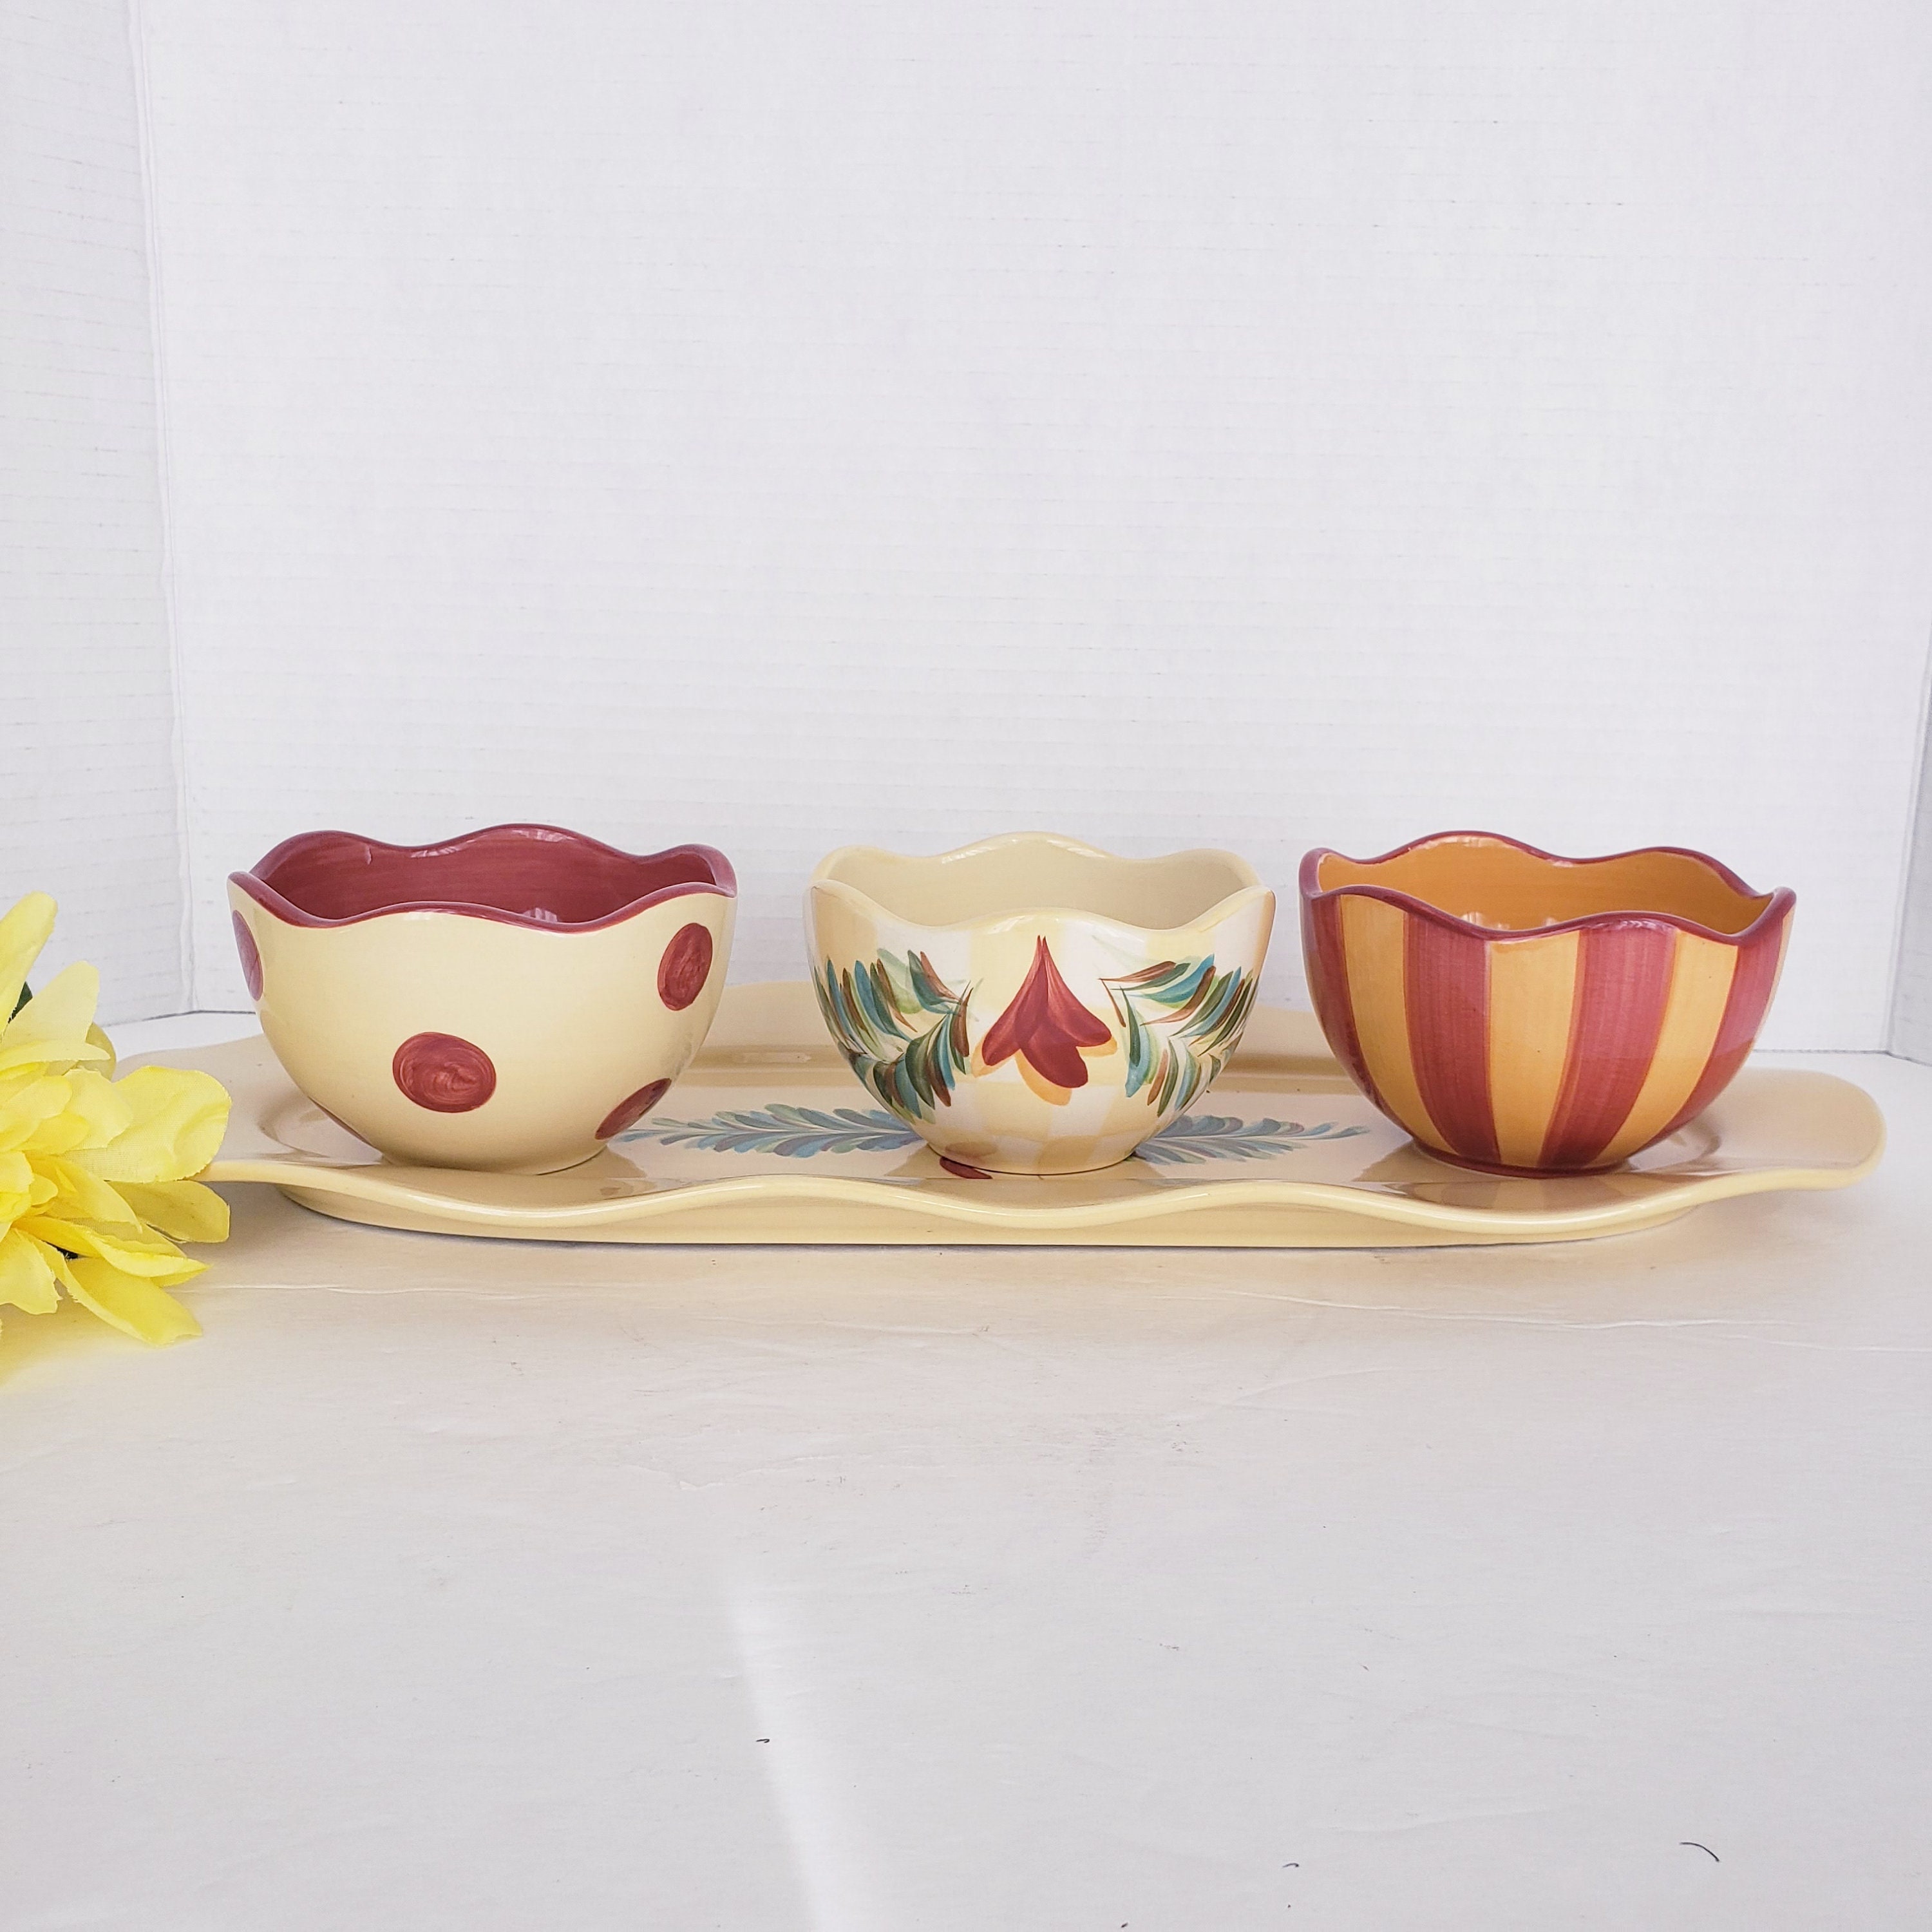 Vintage Set of Three Nesting Mixing Bowls Certified International Siena by  Patricia Brubaker Veggie Motif My40yearcollection 